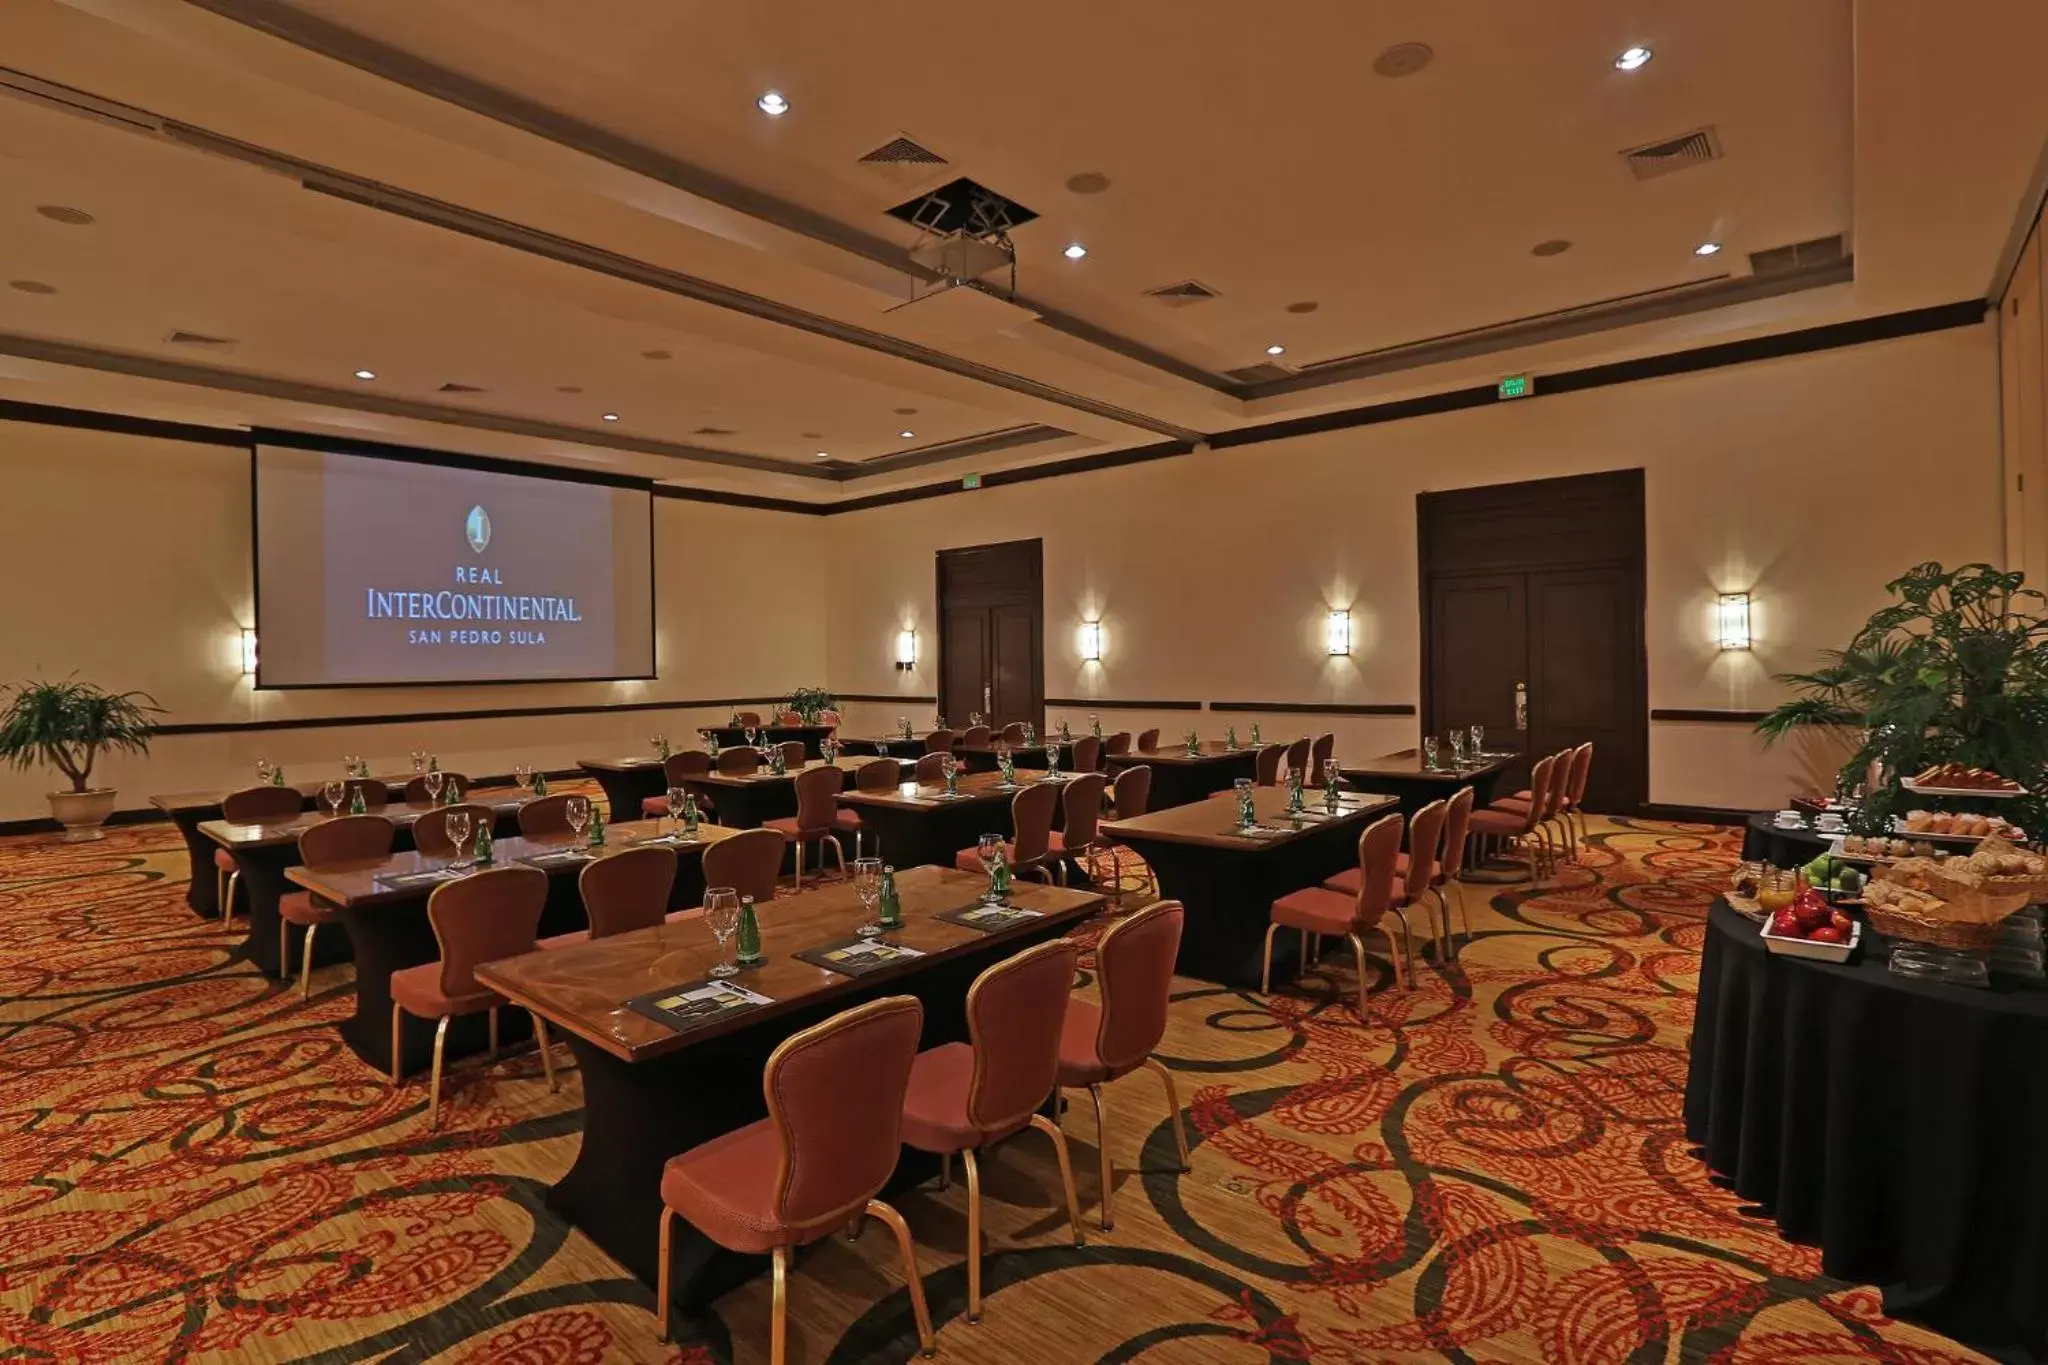 Meeting/conference room, Banquet Facilities in Hotel Real InterContinental San Pedro Sula, an IHG Hotel